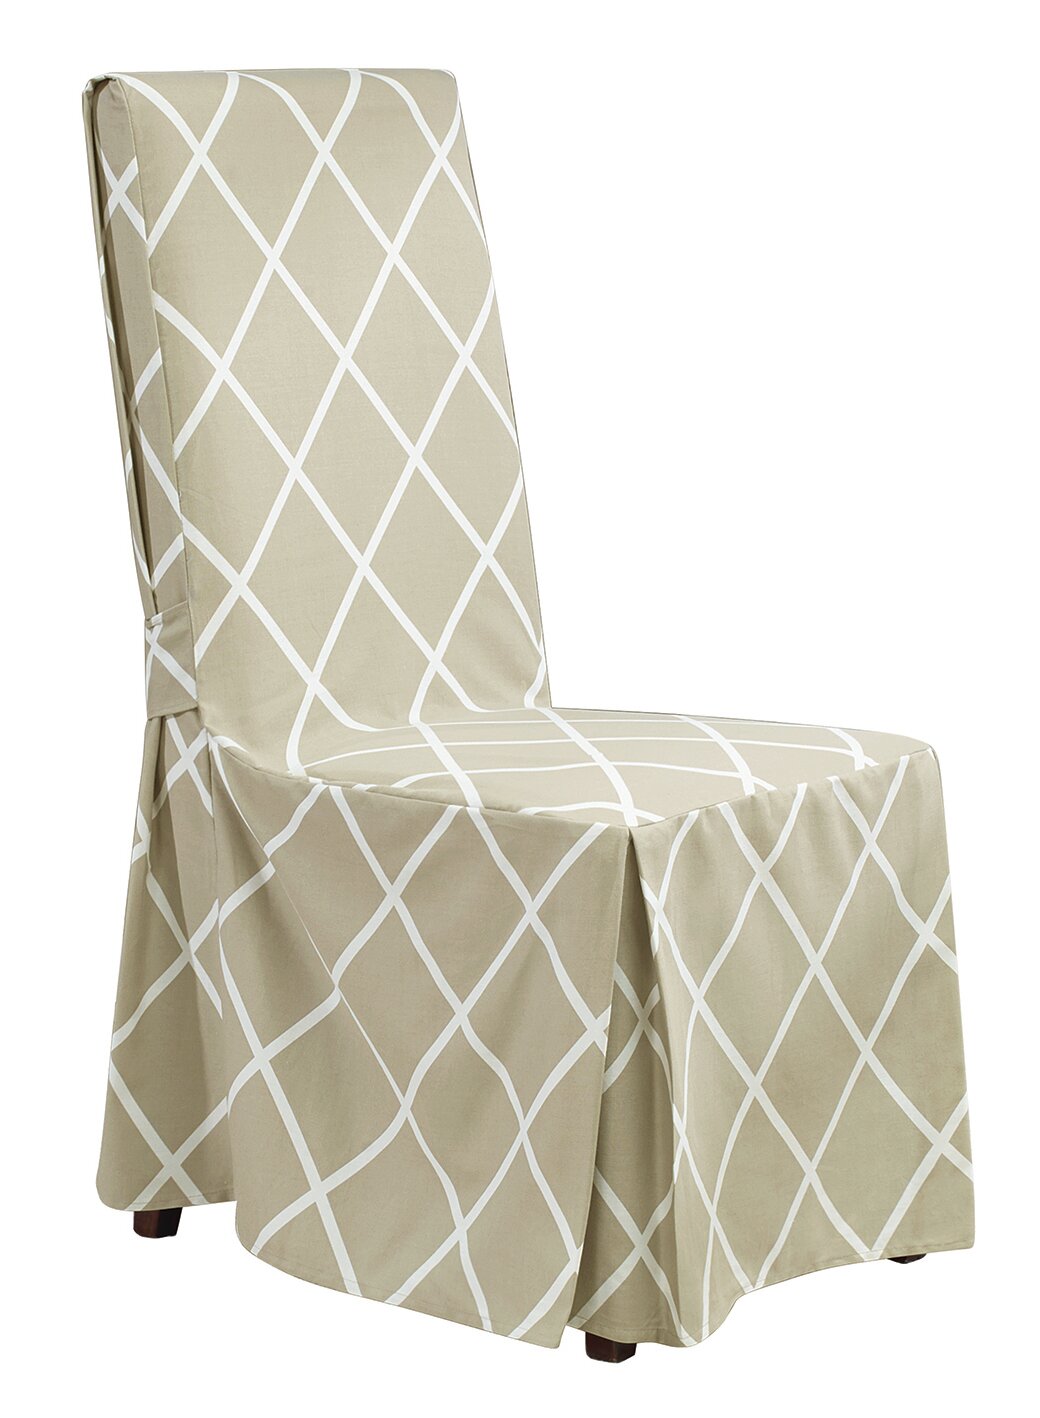 parson chair covers target